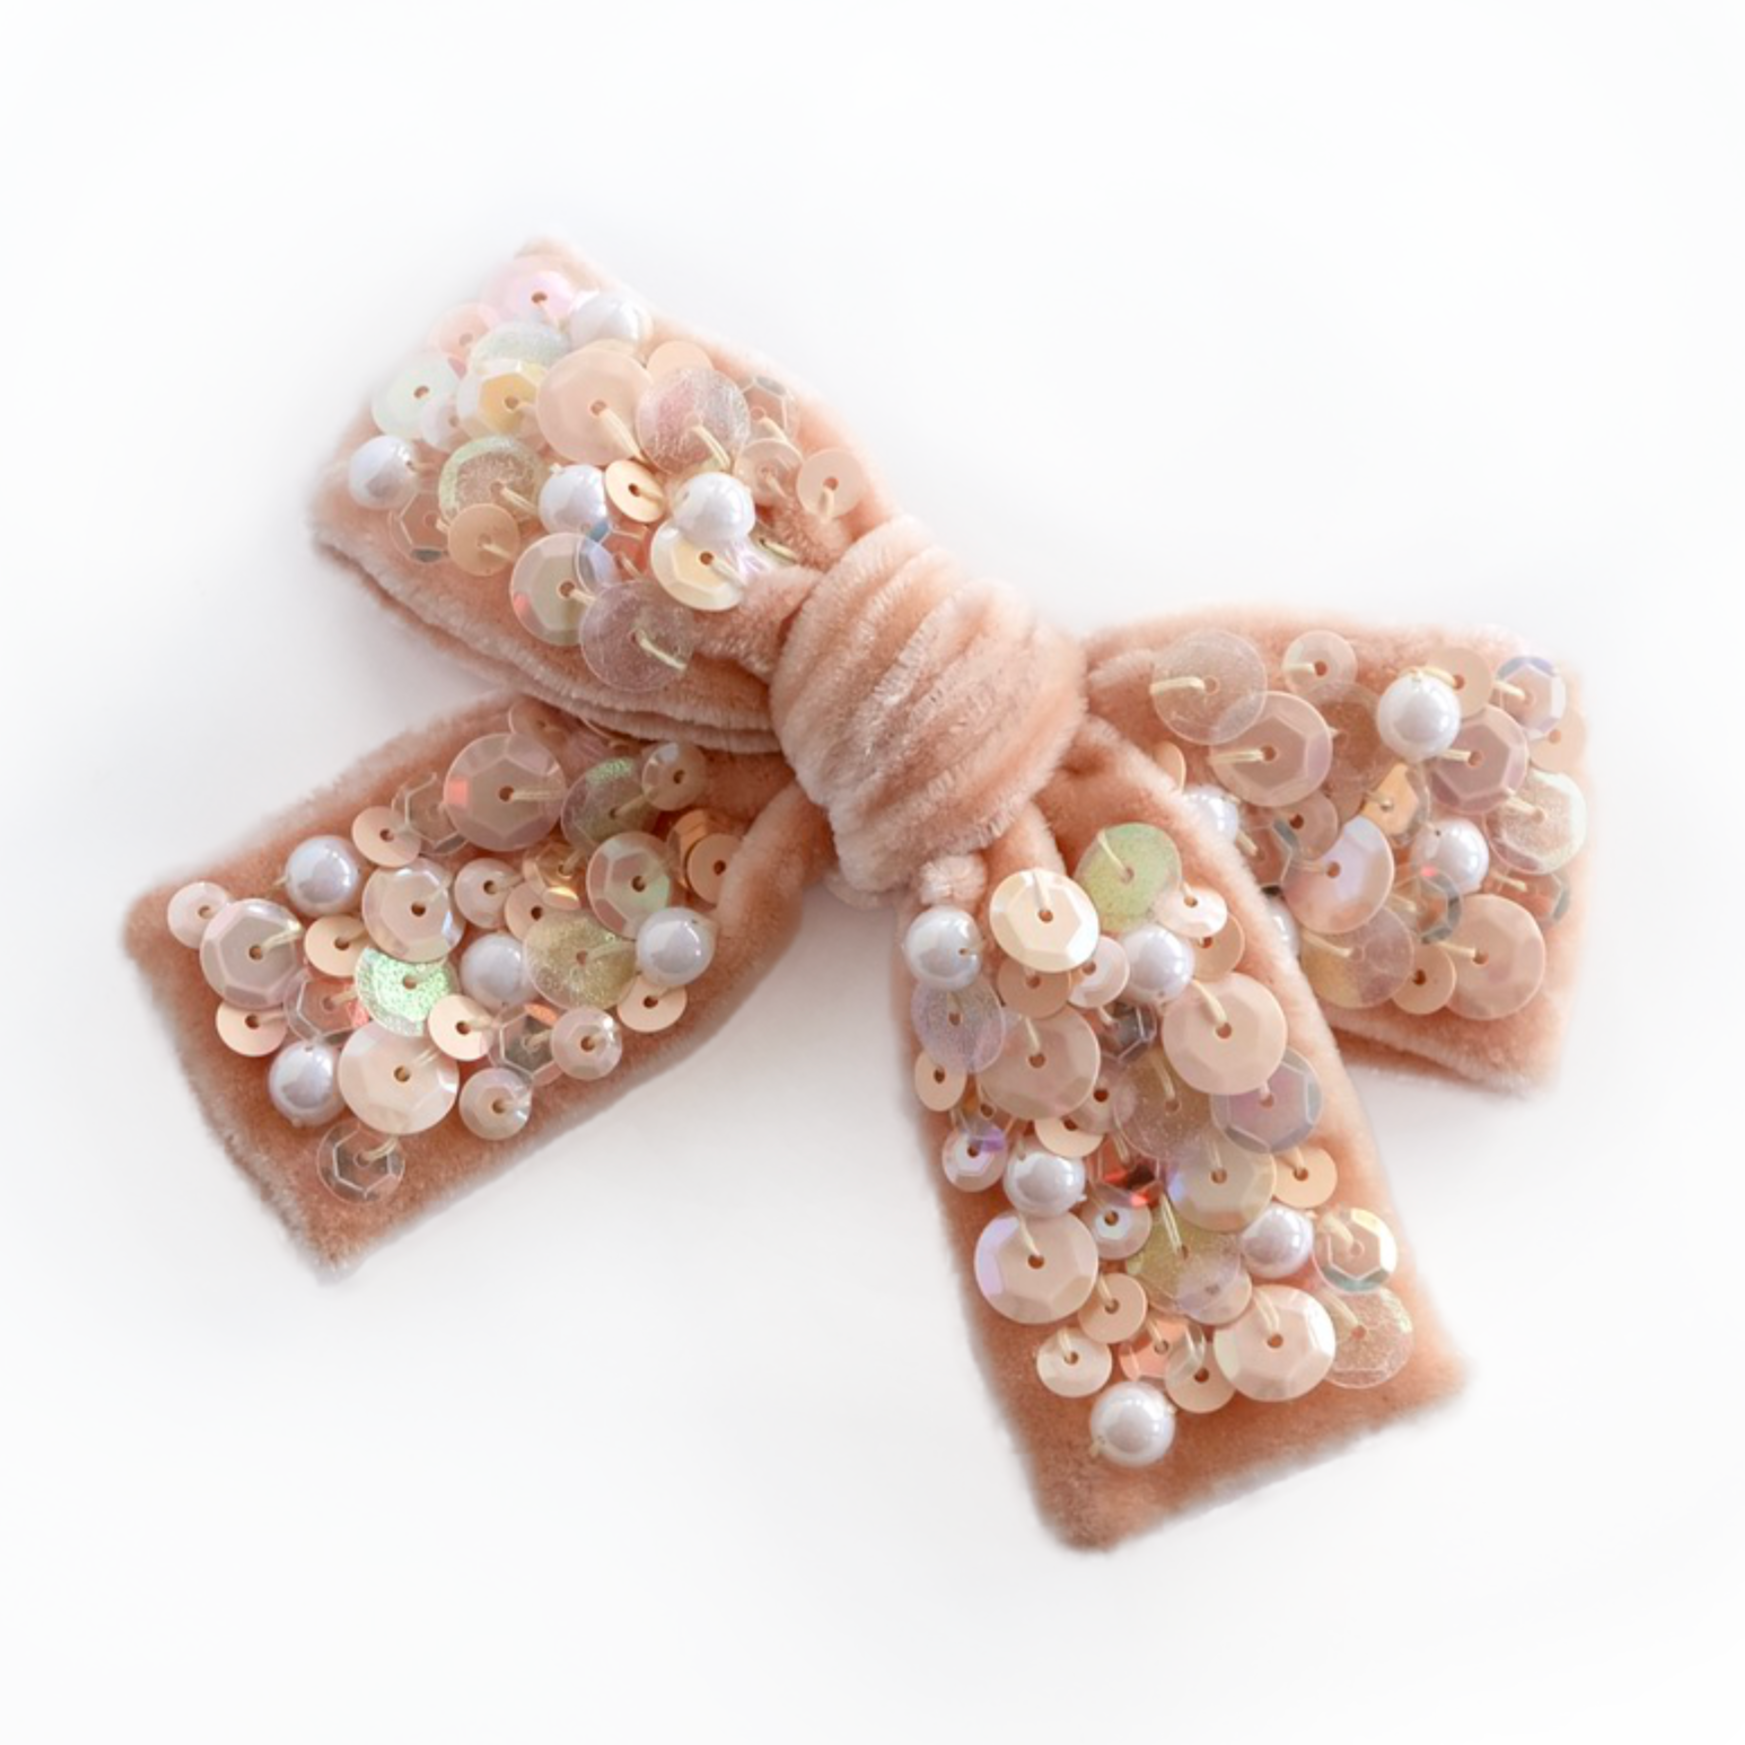 Peach colored hair bow made from velvet and embellished with sequins and pearls.